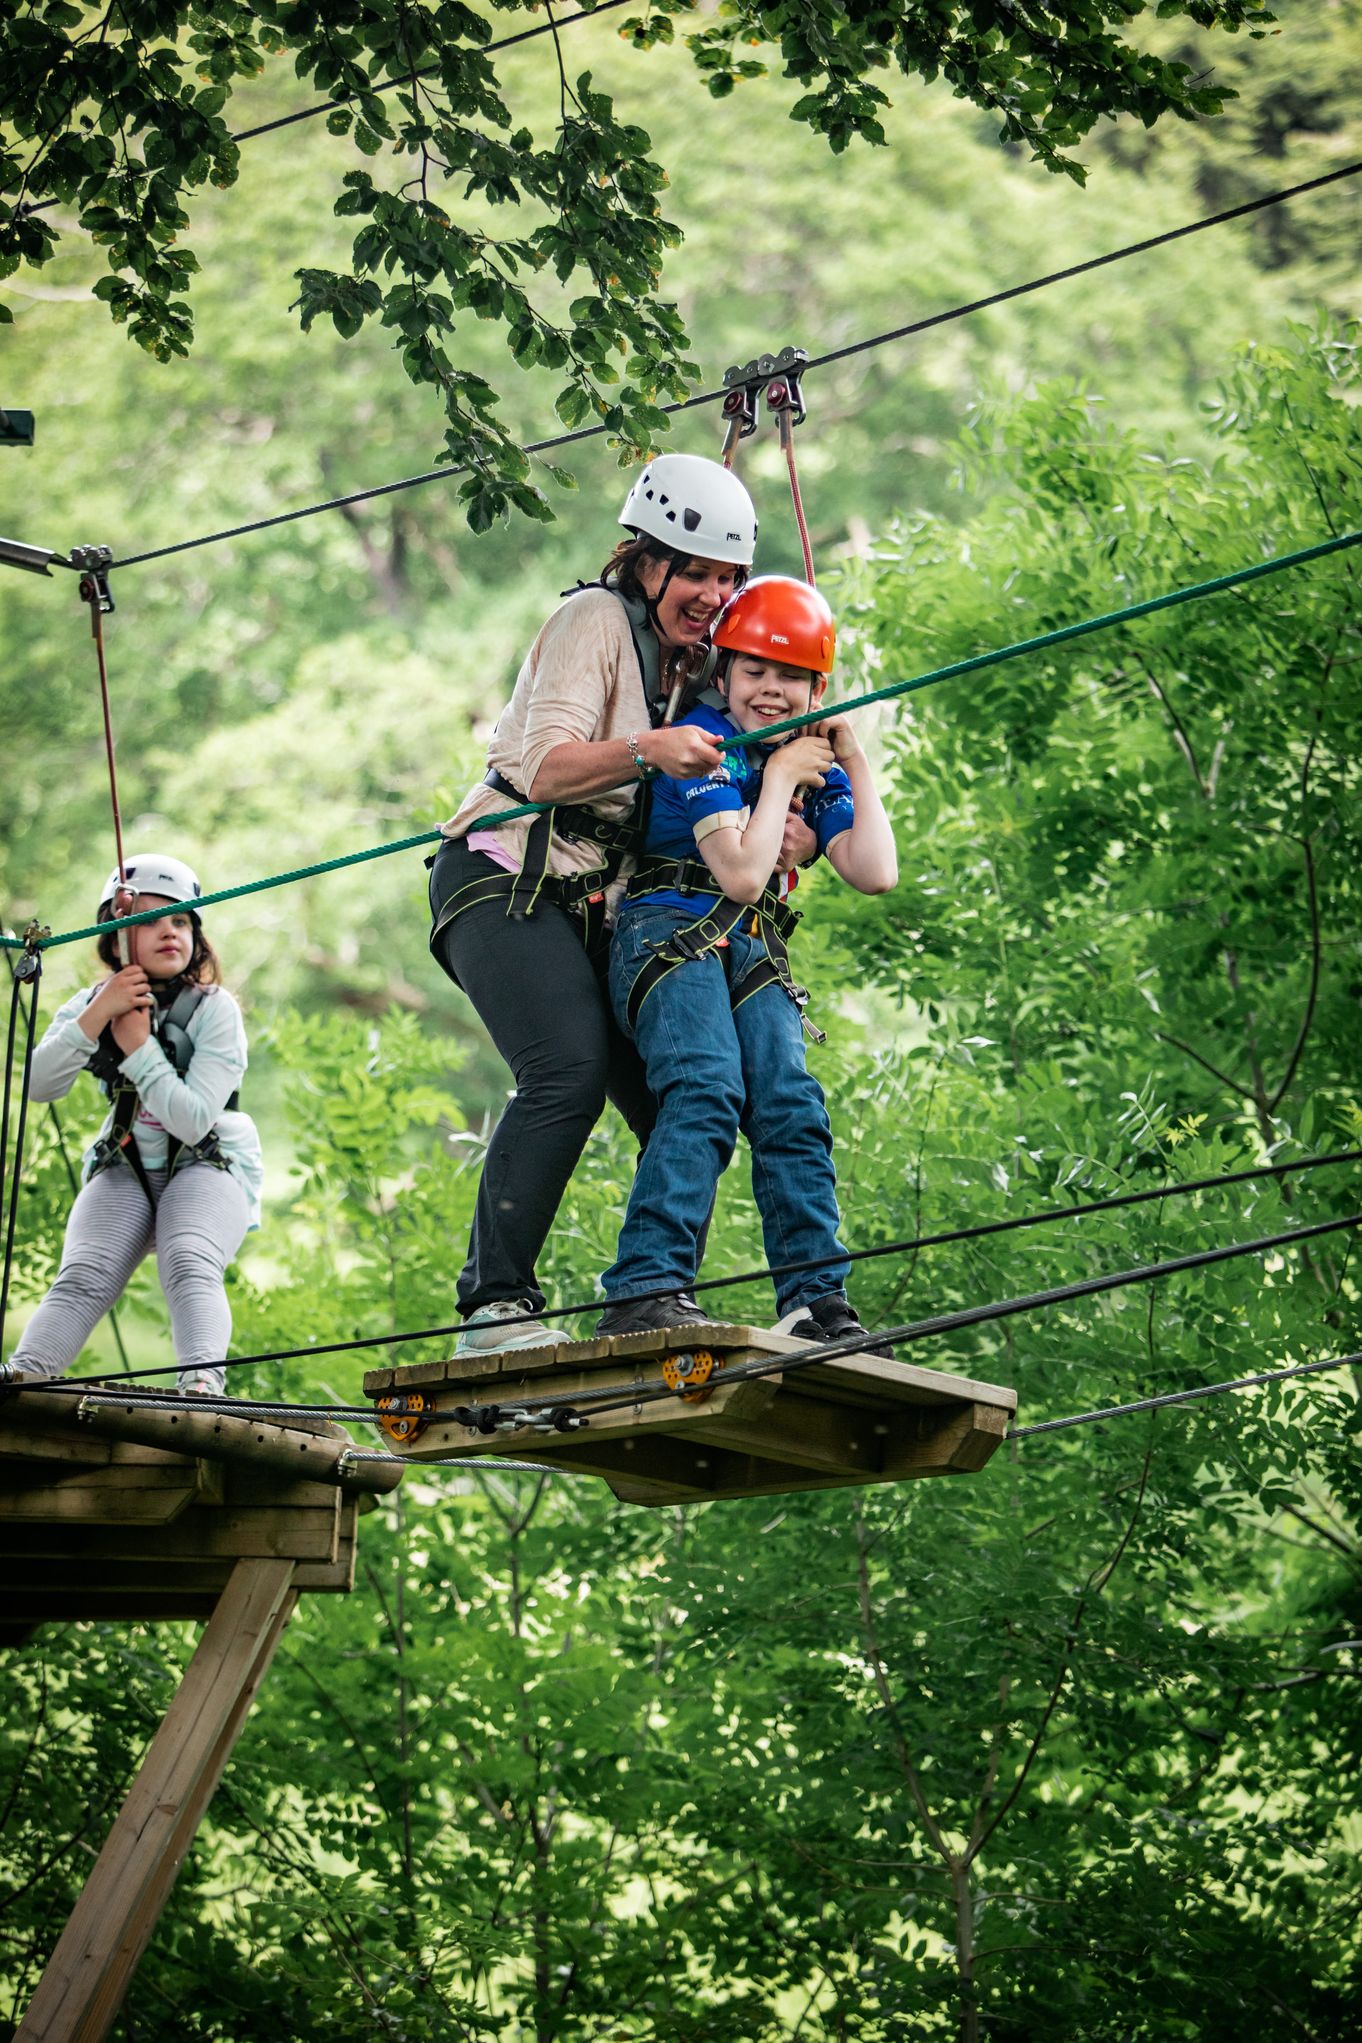 Oliver Voysey supported by mum Sarah and watched over by sister Elizabeth, aces the Calvert Lakes high ropes course